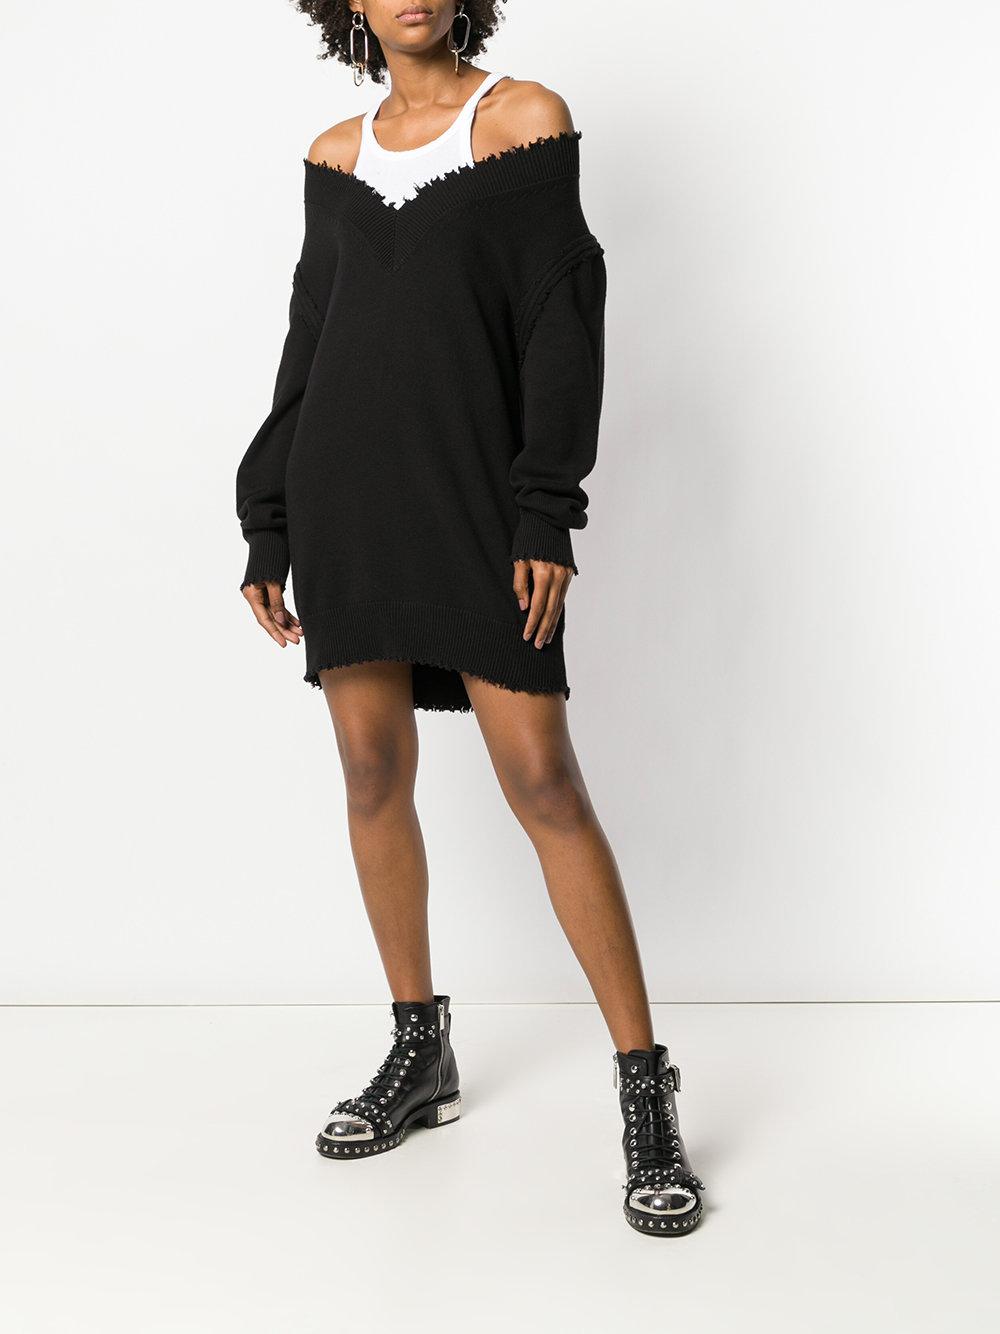 T By Alexander Wang Cotton Distressed Sweater Dress in Black - Lyst